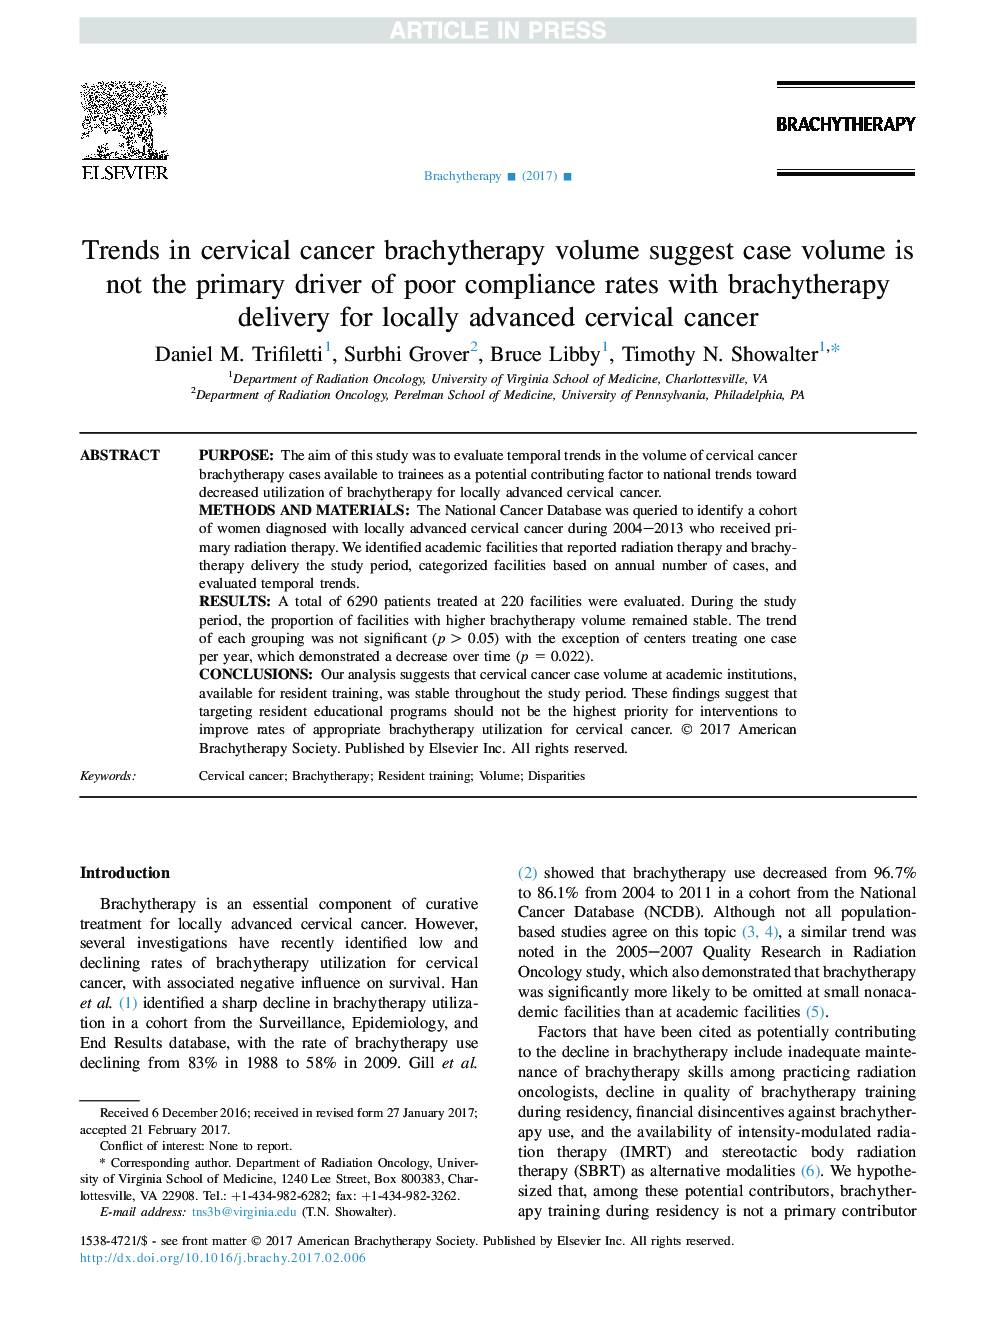 Trends in cervical cancer brachytherapy volume suggest case volume is not the primary driver of poor compliance rates with brachytherapy delivery for locally advanced cervical cancer